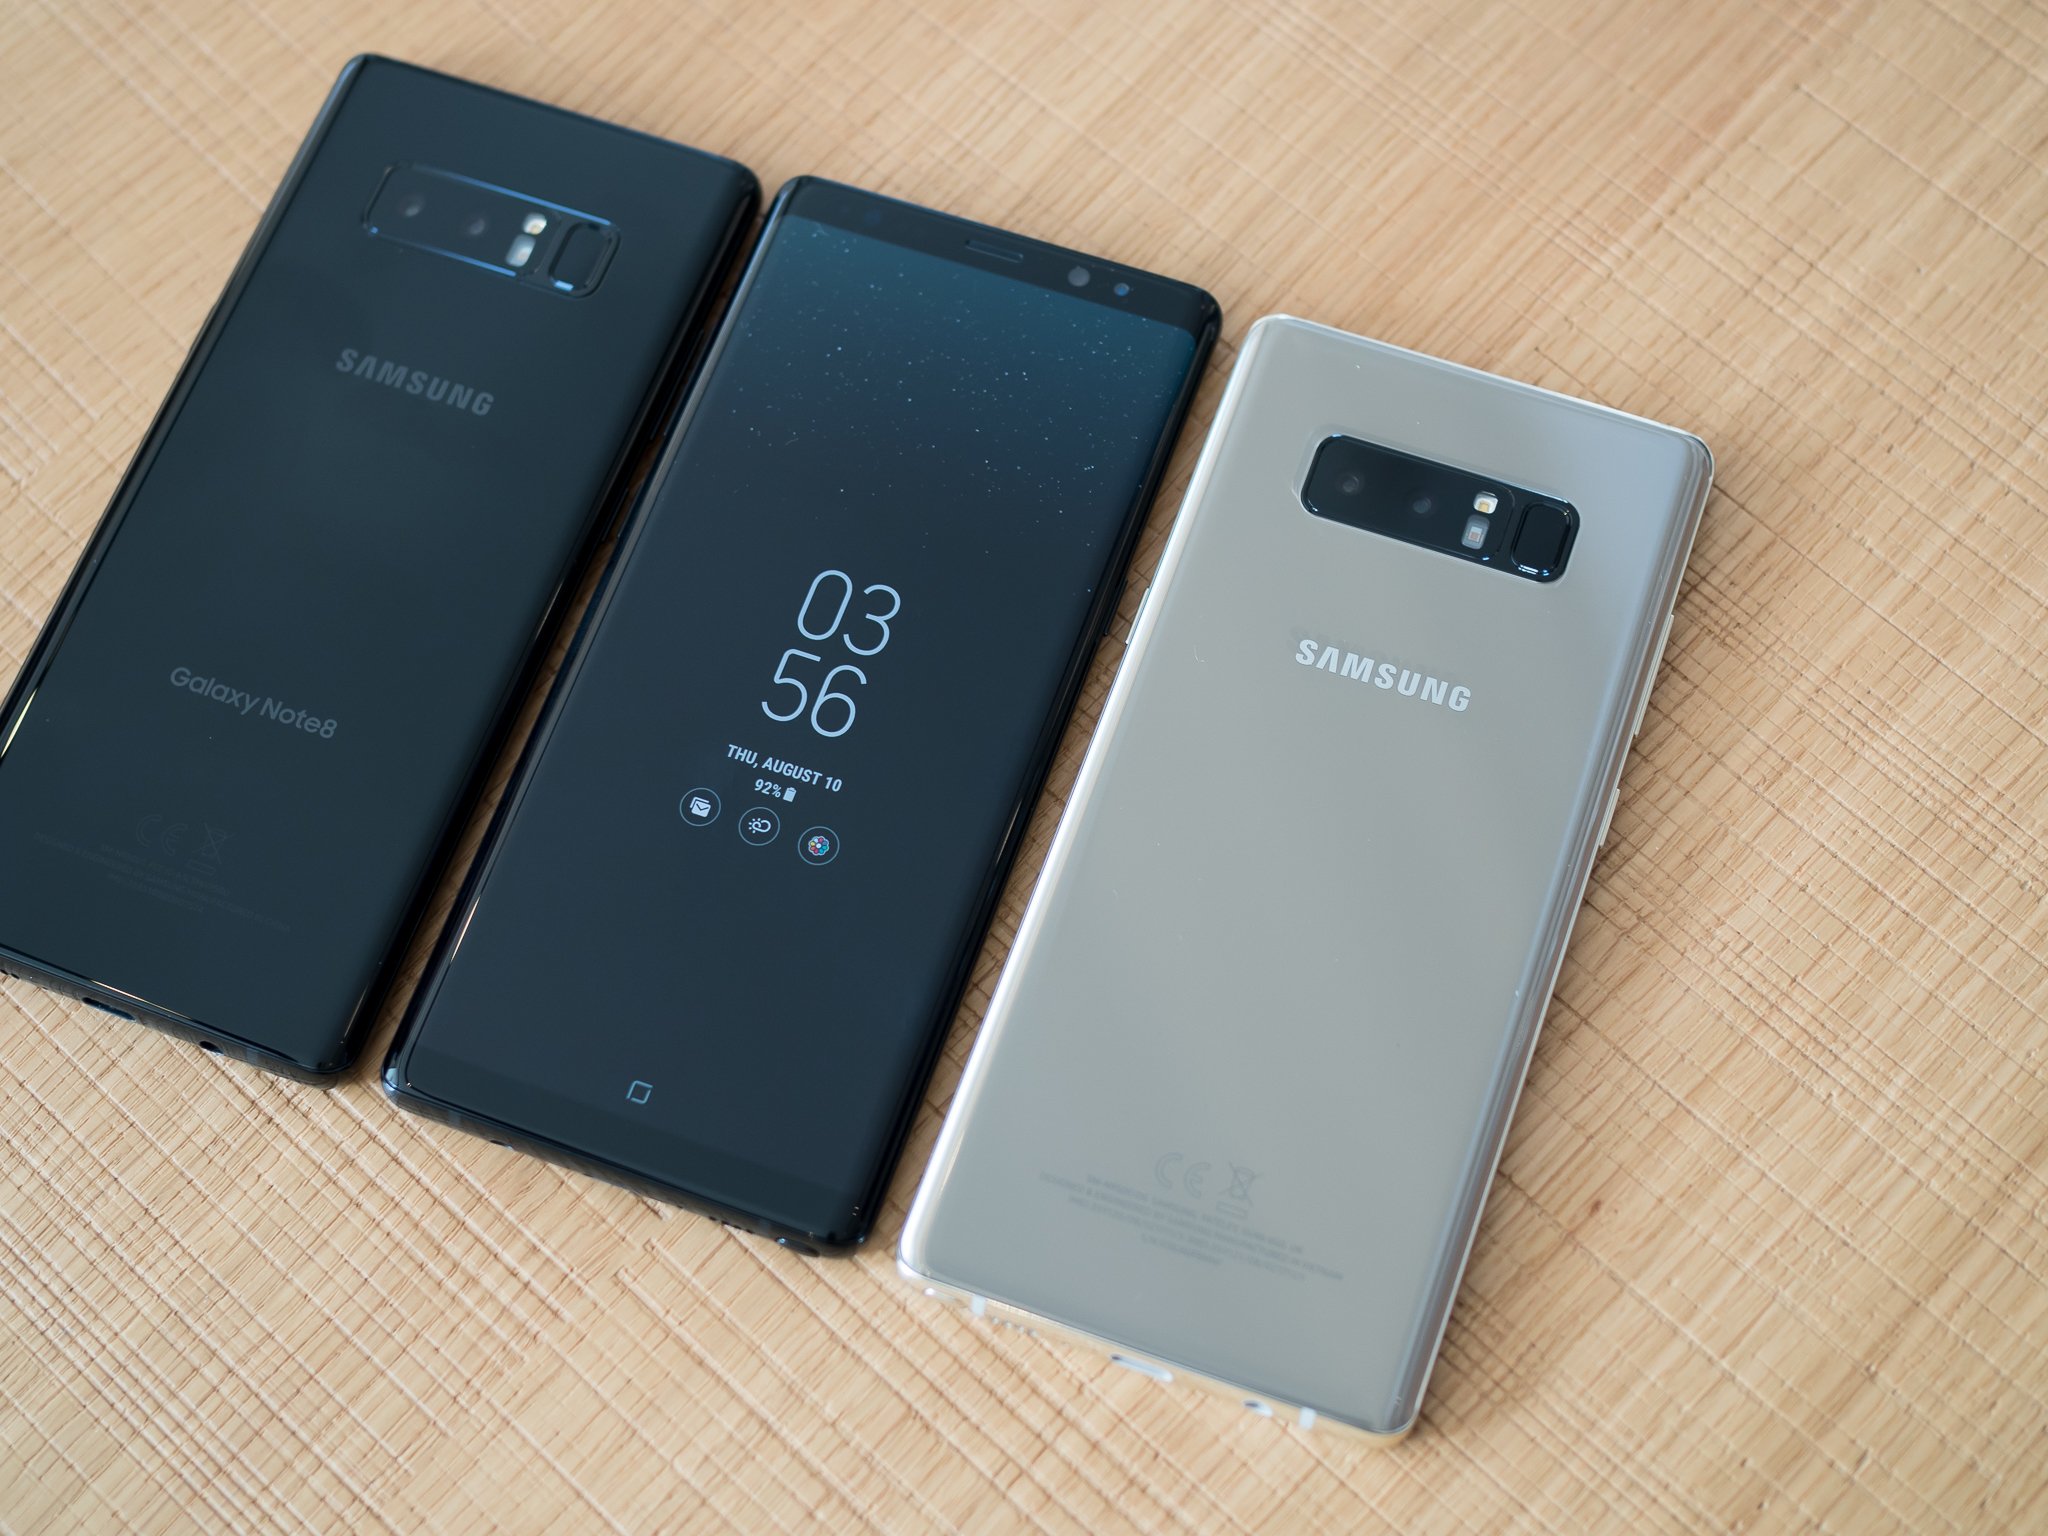 Where to buy the Samsung Galaxy Note 8